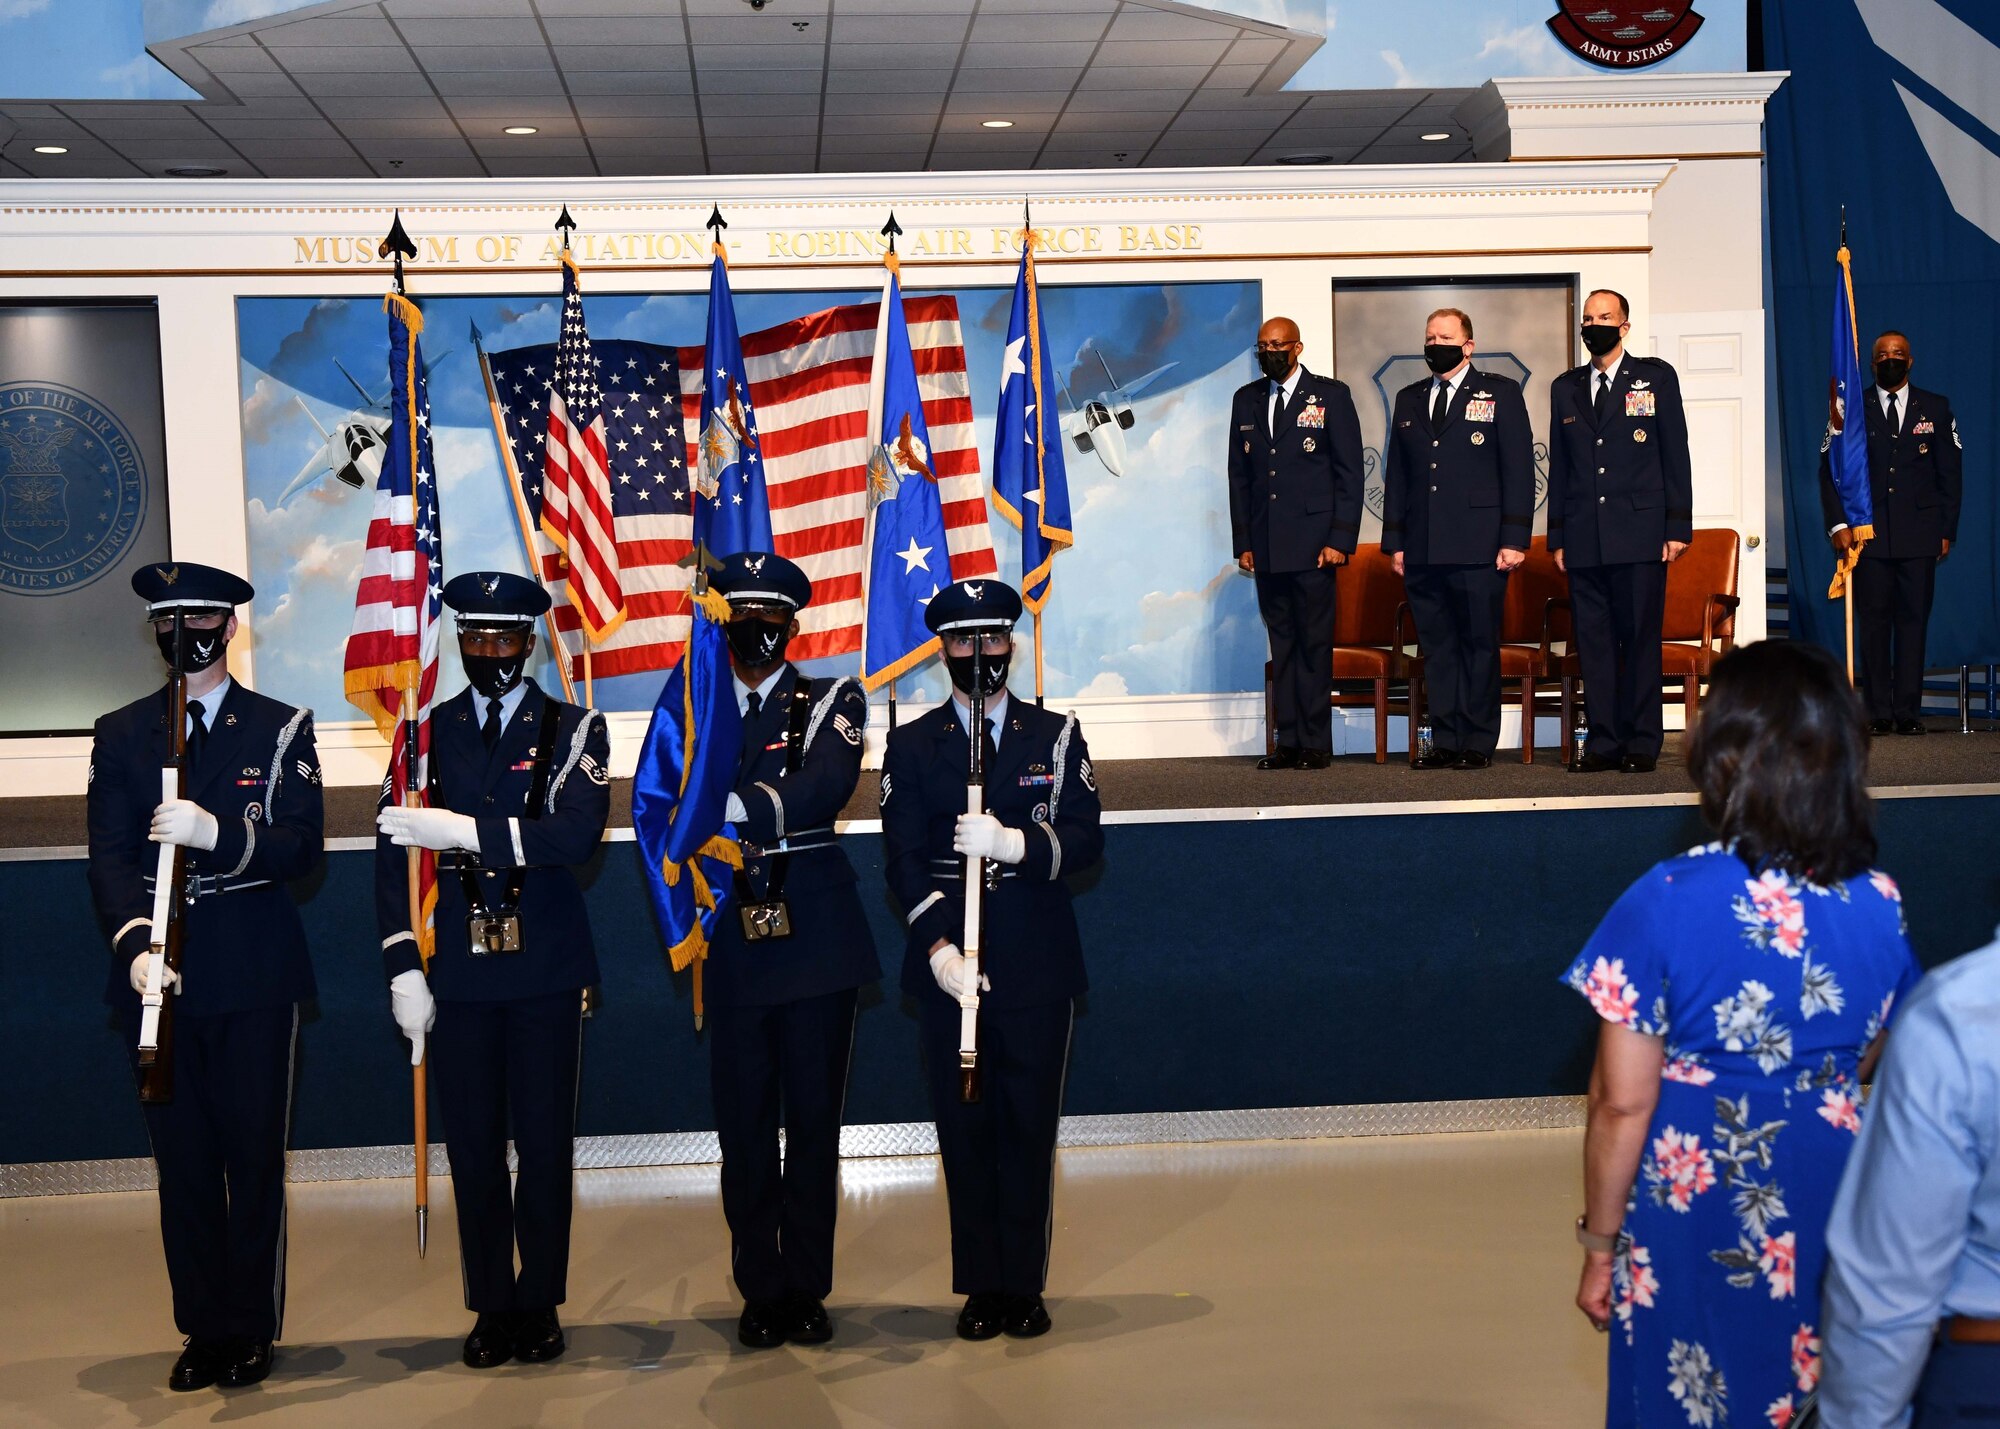 Photo of honor guard presenting the colors during a change of command ceremony